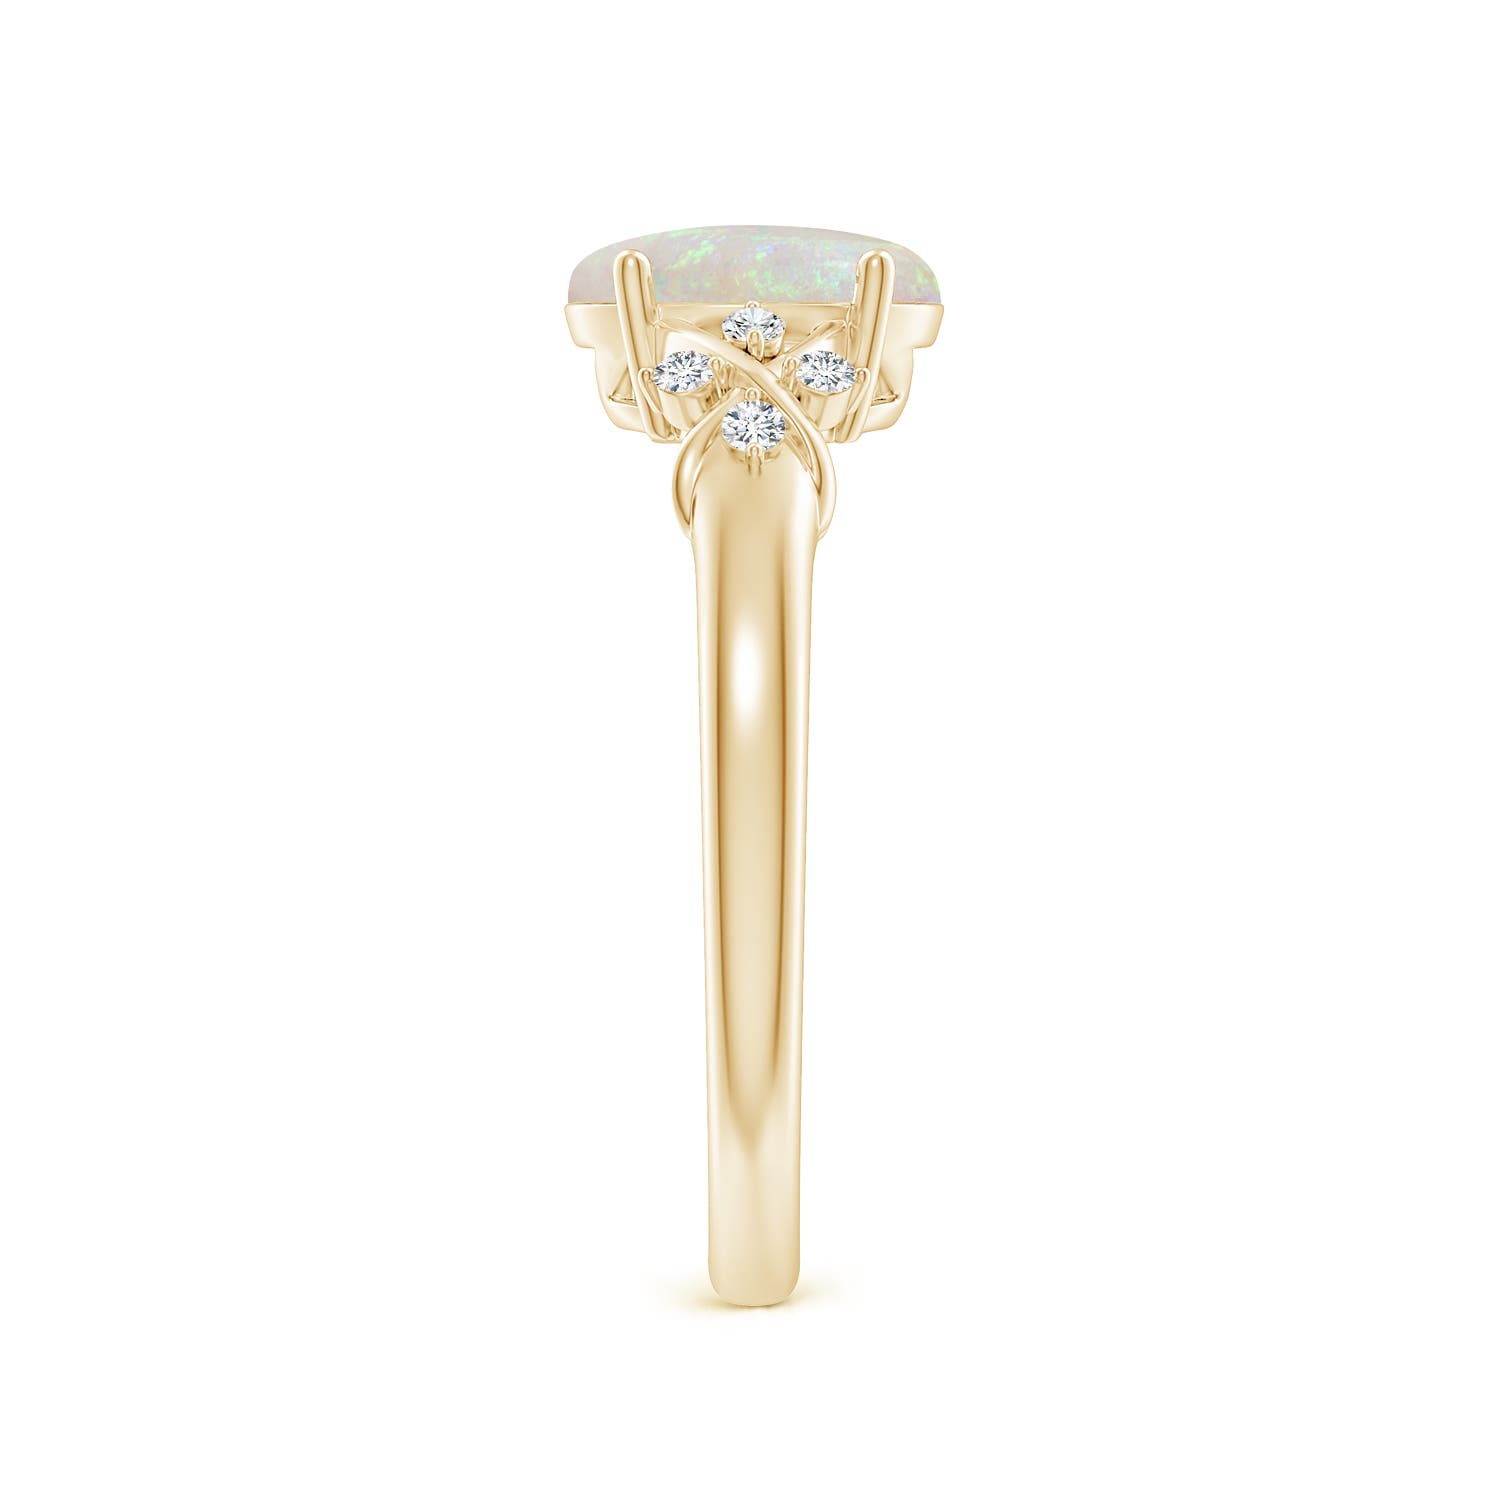 AA - Opal / 0.88 CT / 14 KT Yellow Gold